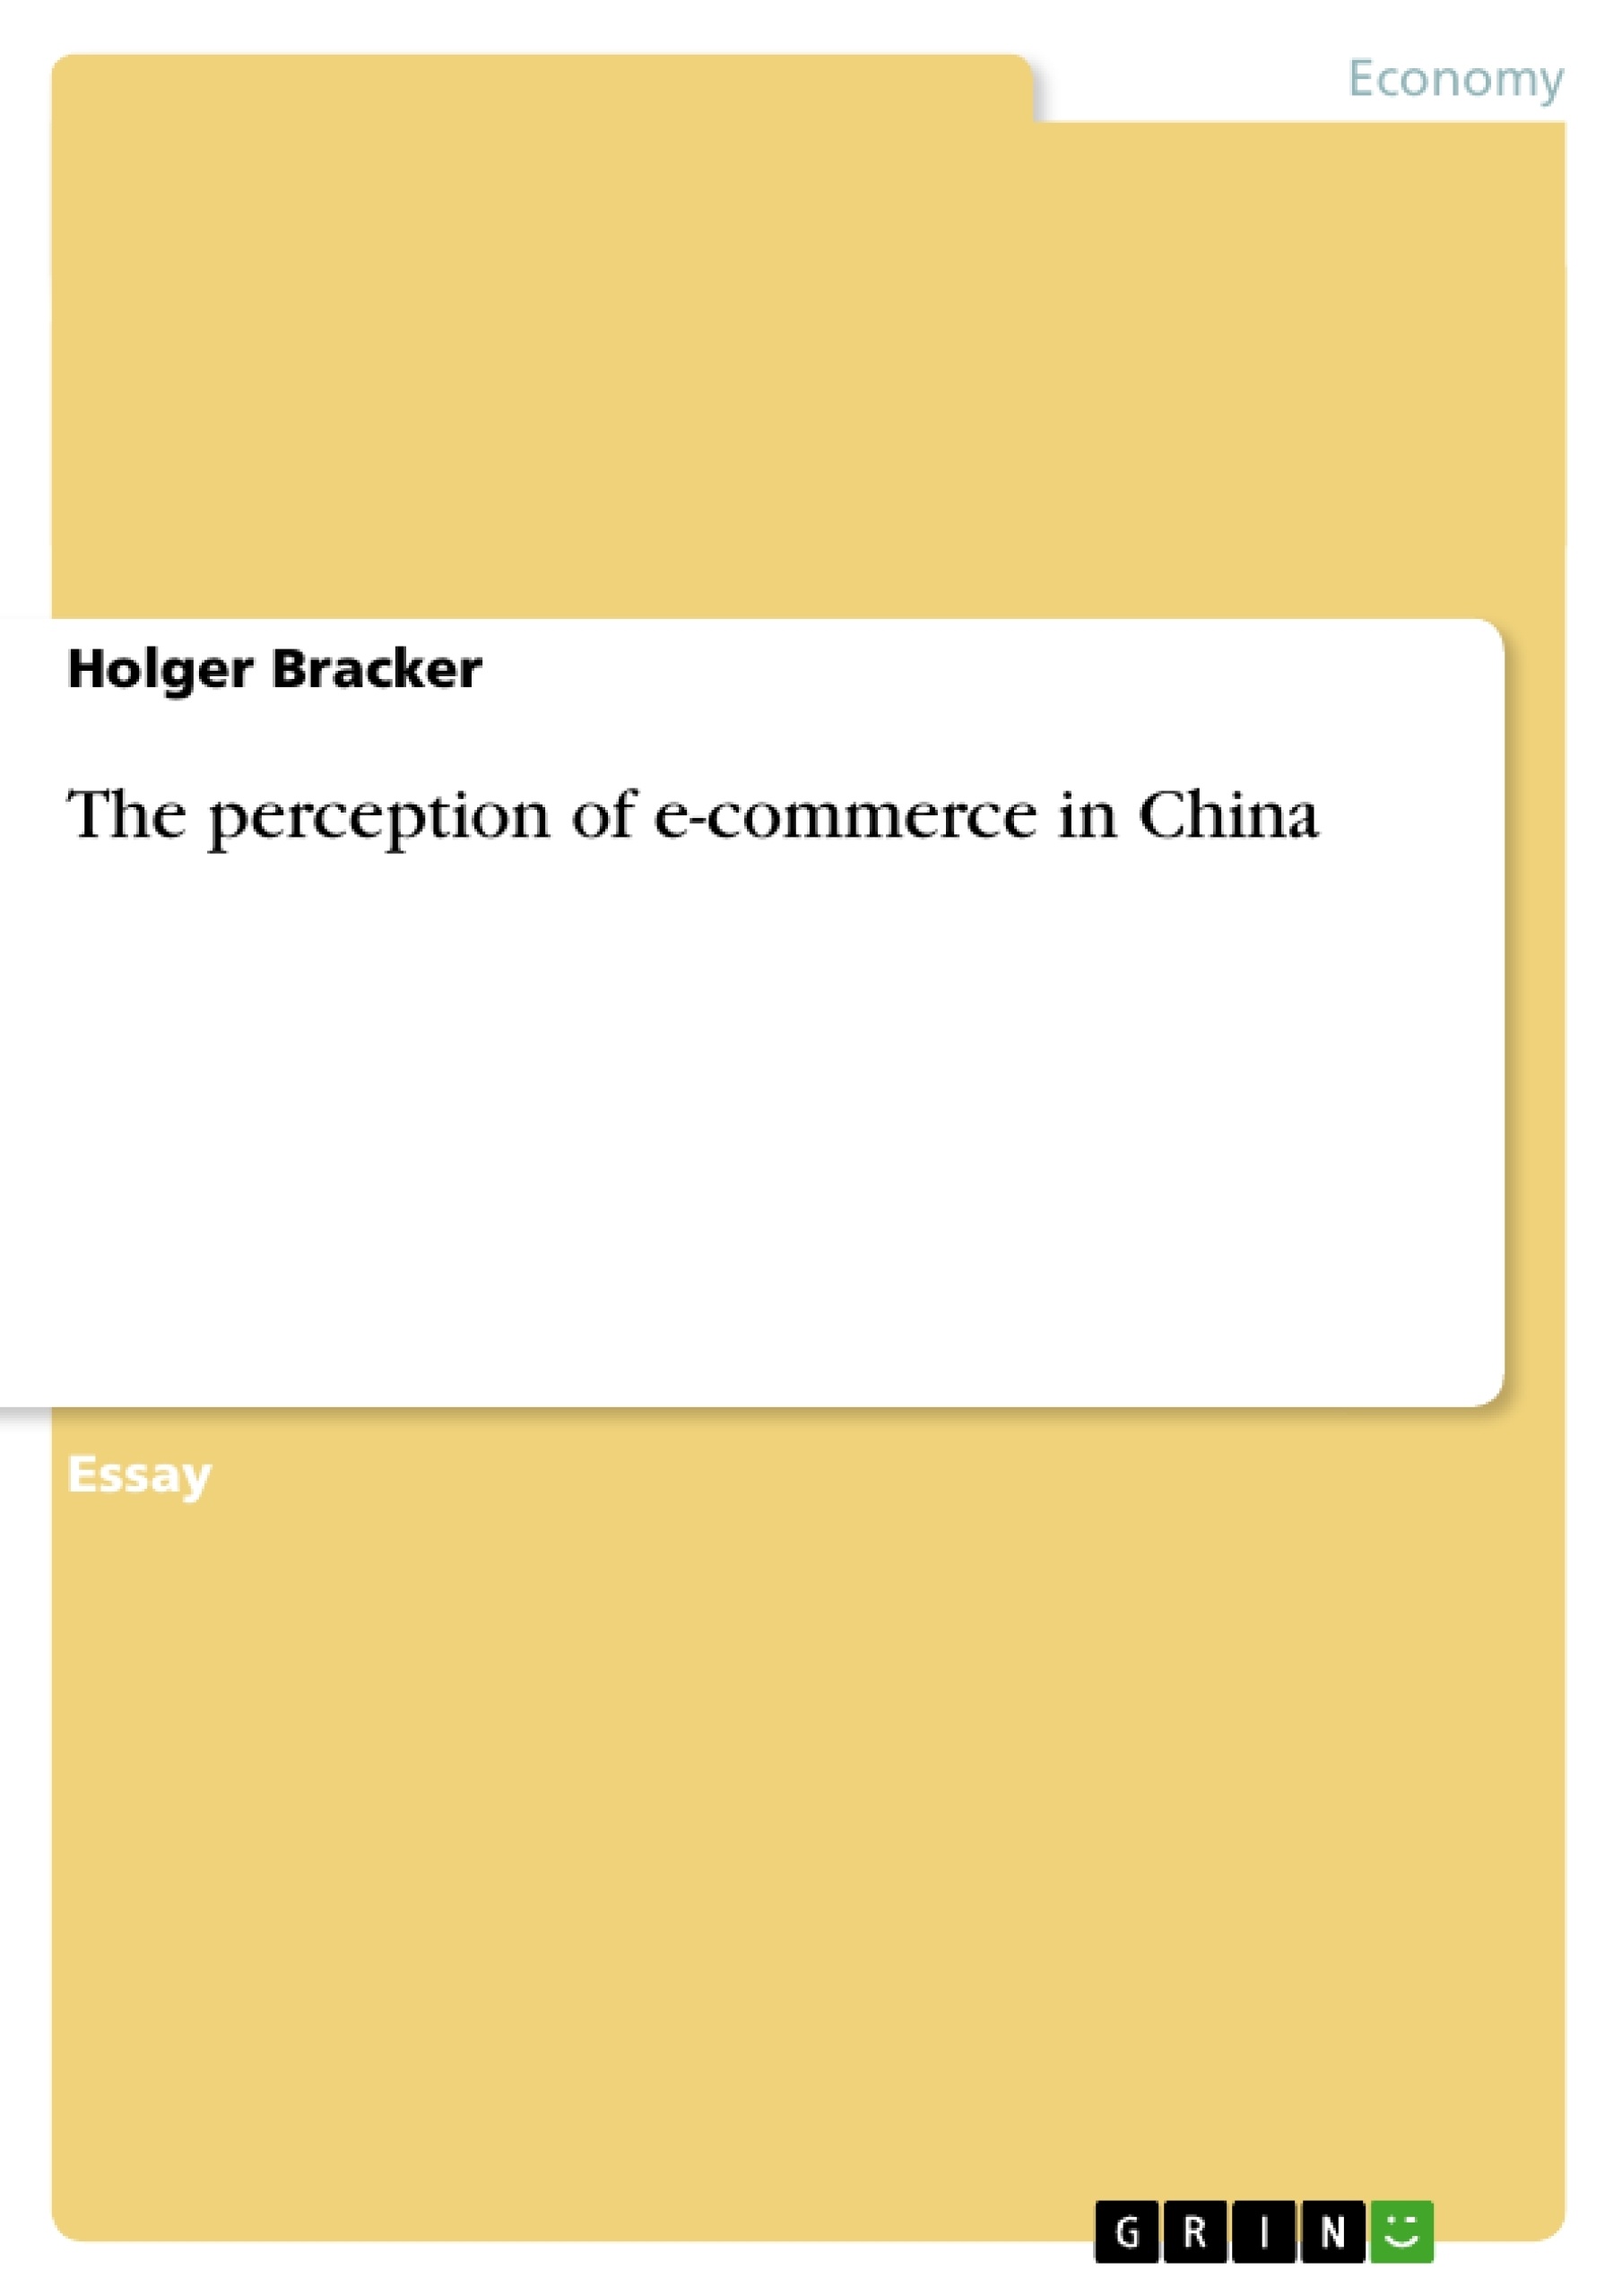 Title: The perception of e-commerce in China